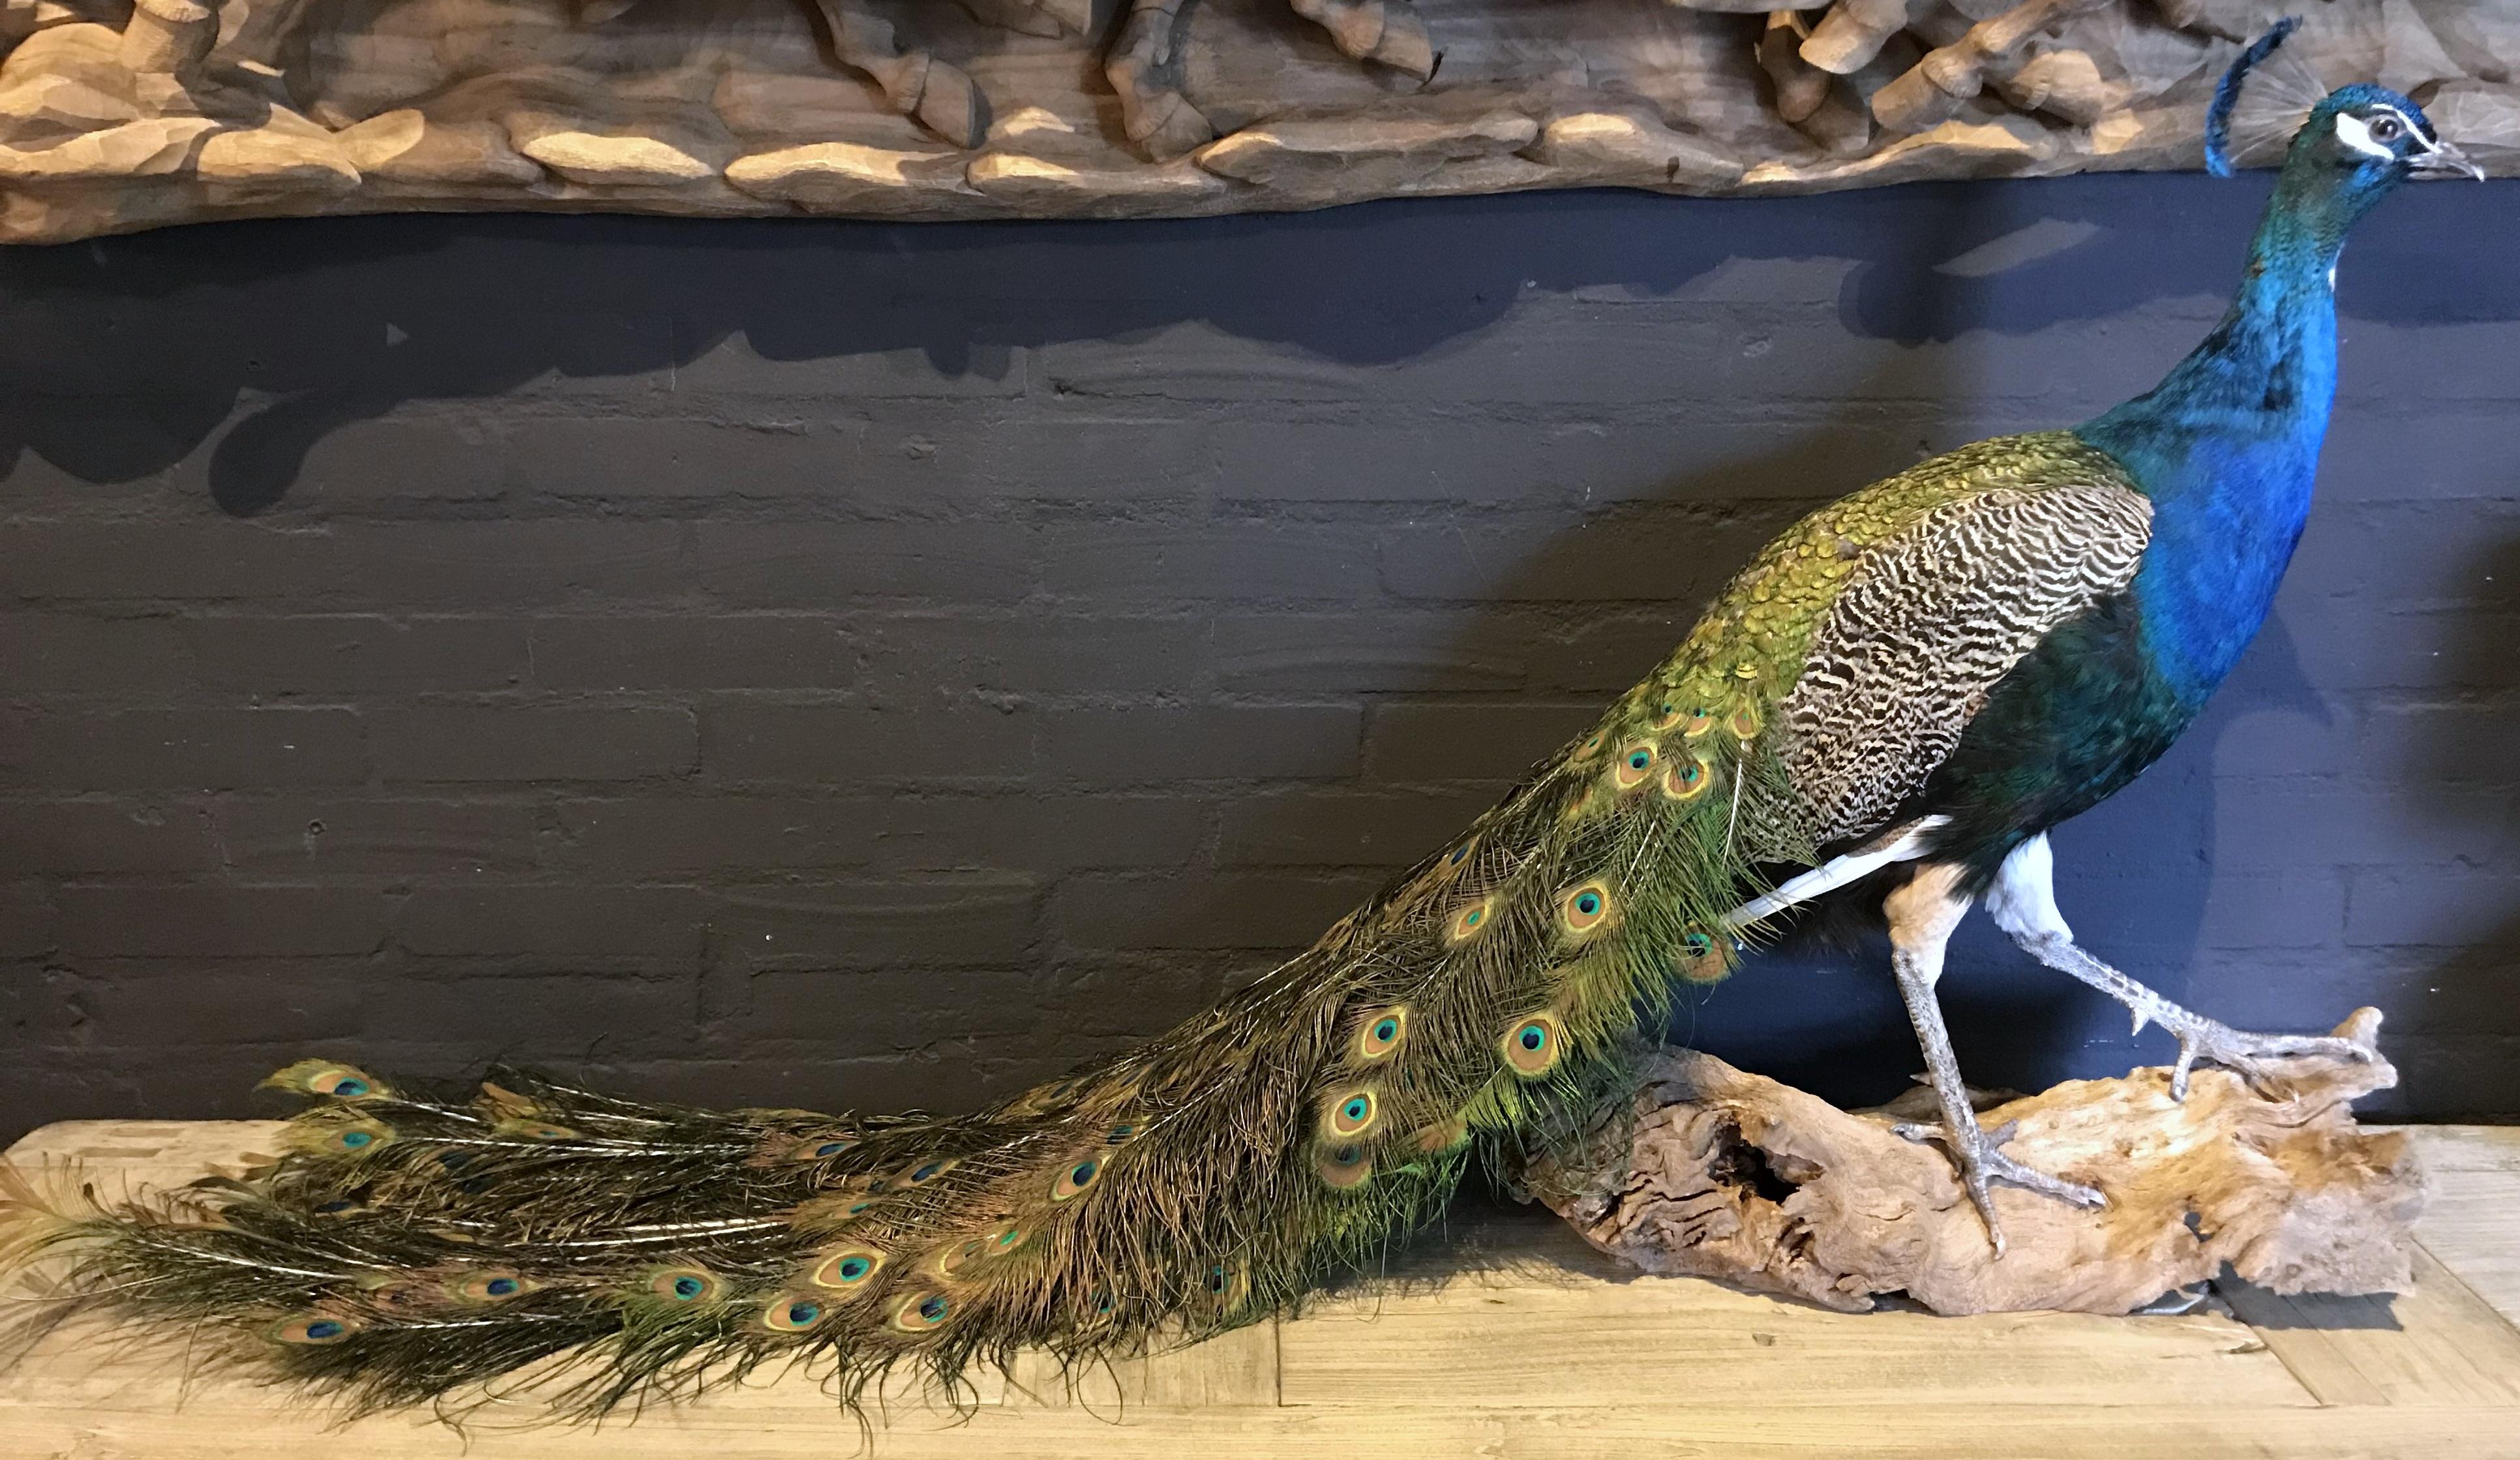 Recently mounted blue peacock. A very decorative piece of taxidermy with beautiful colors.